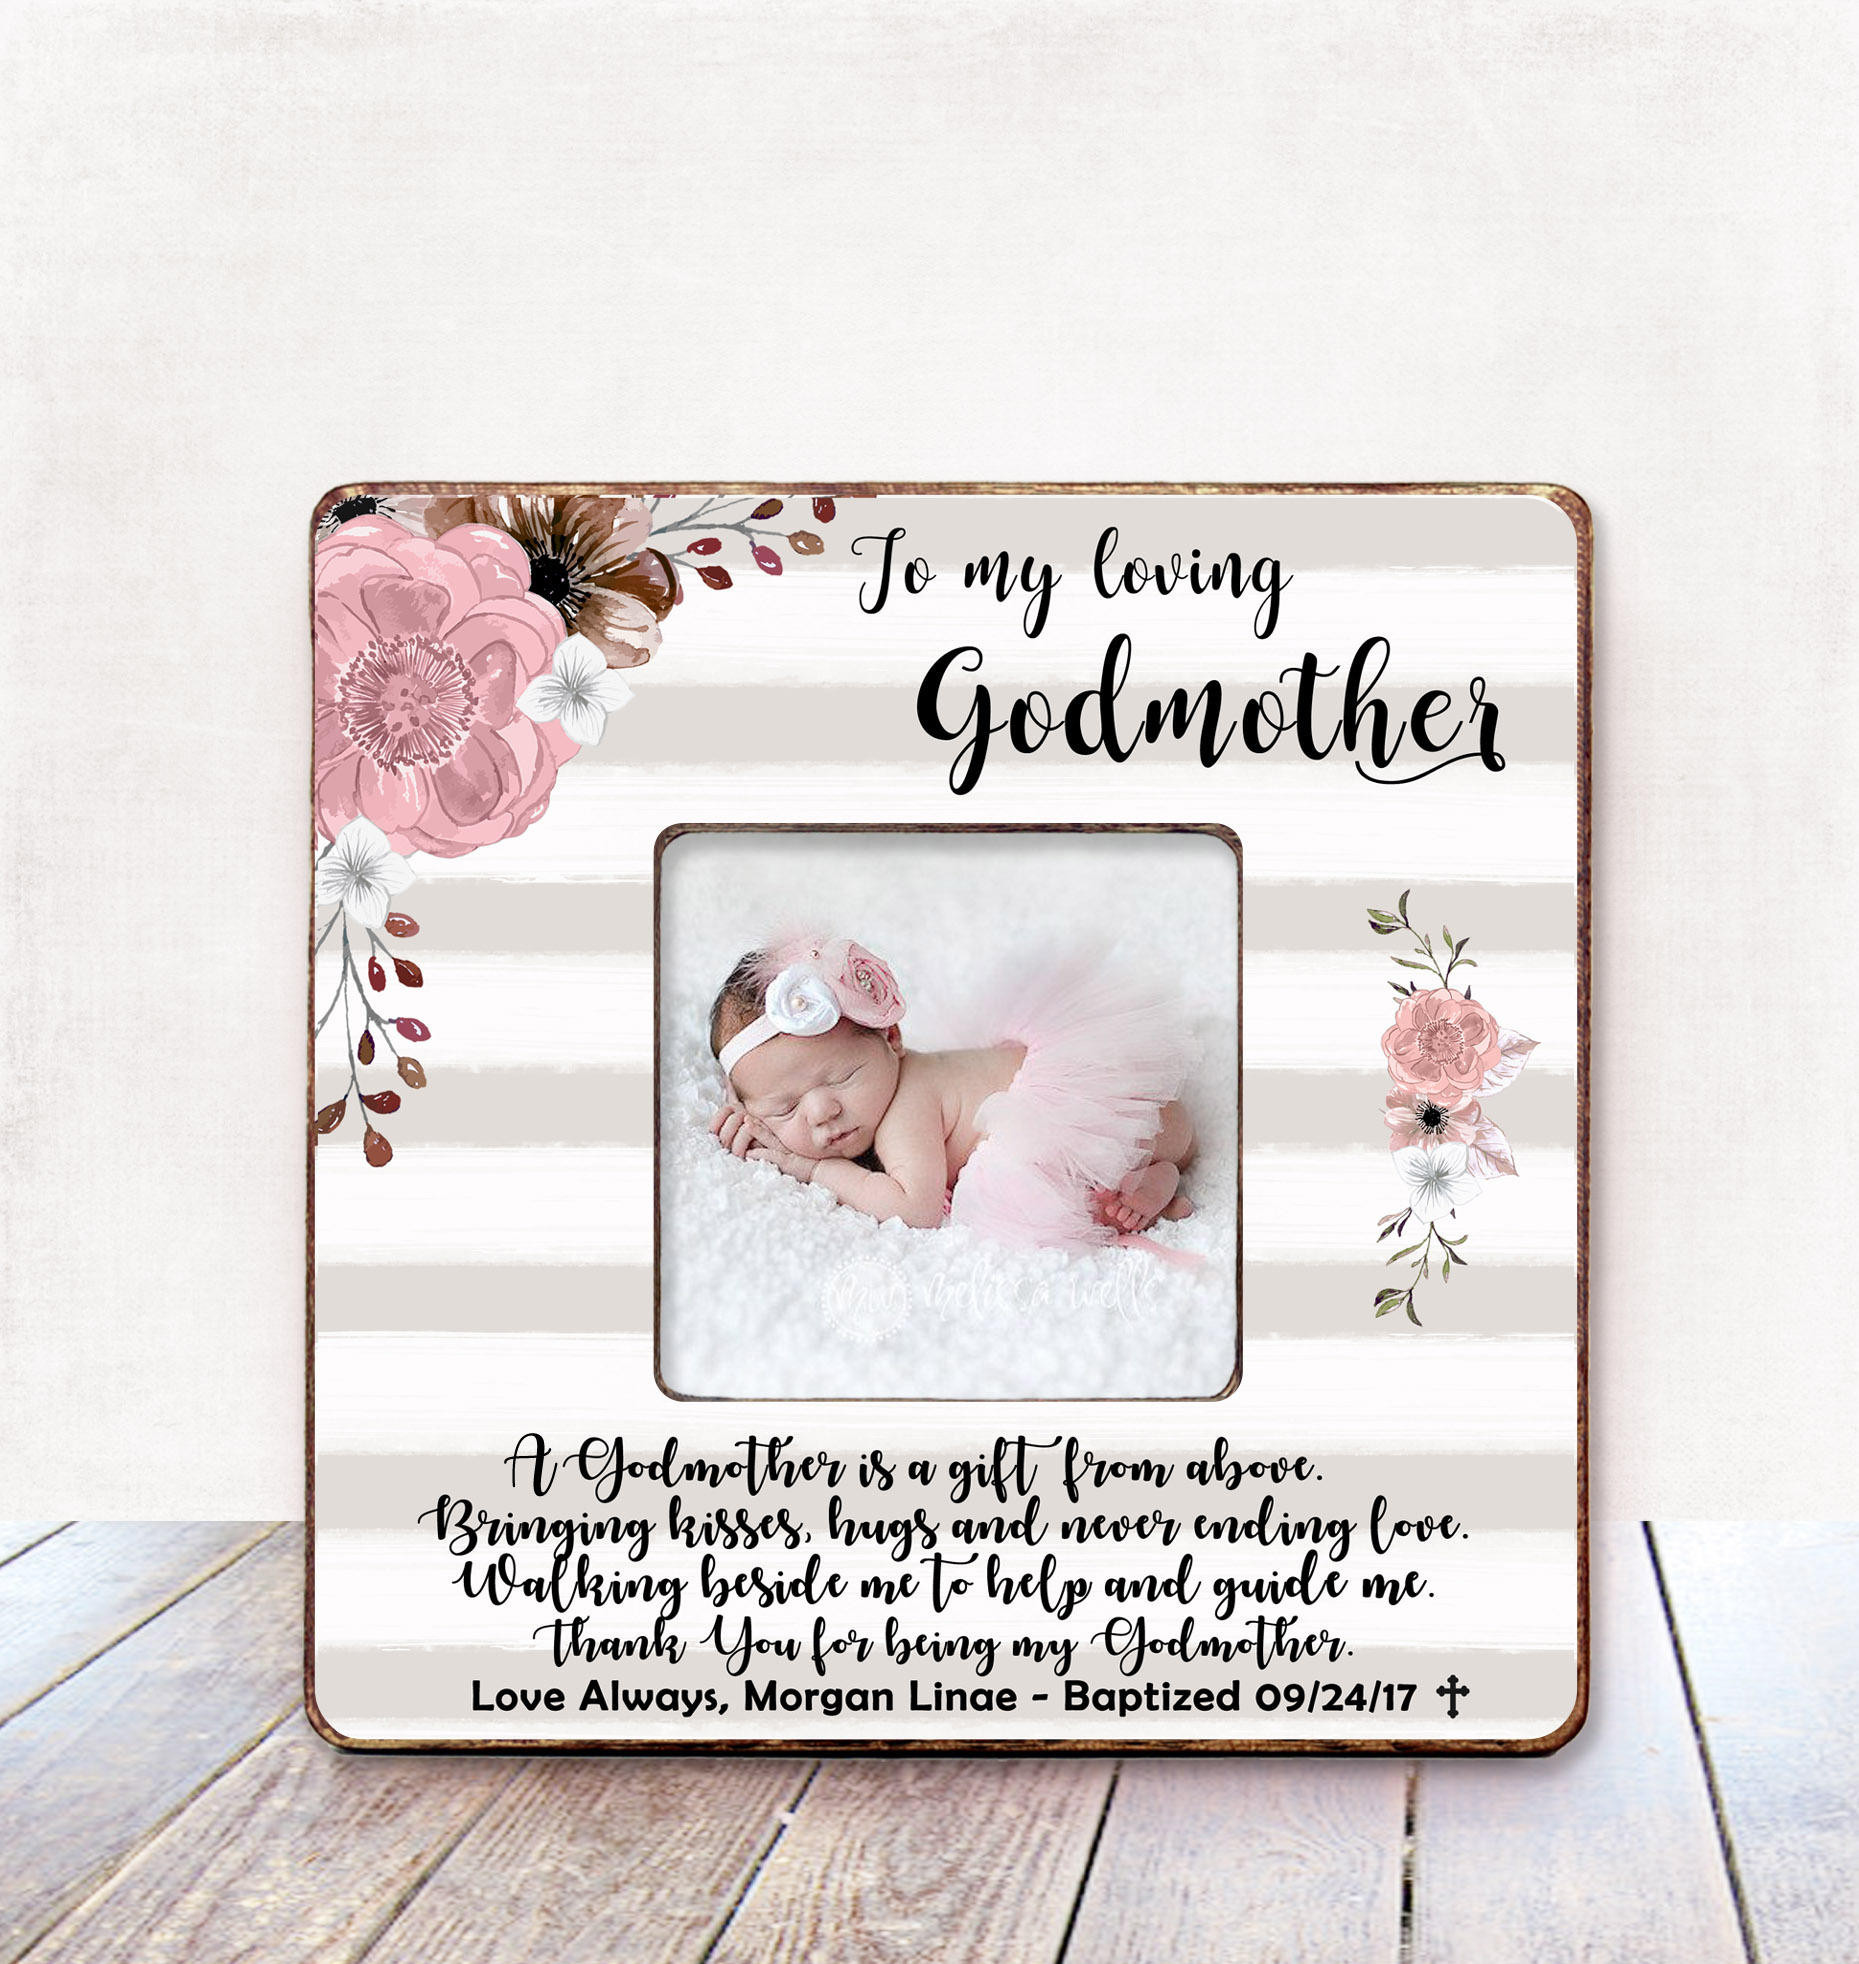 Christening Gift Ideas From Godmother
 Best 30 Godmother Gift Ideas for Baptism Home Family